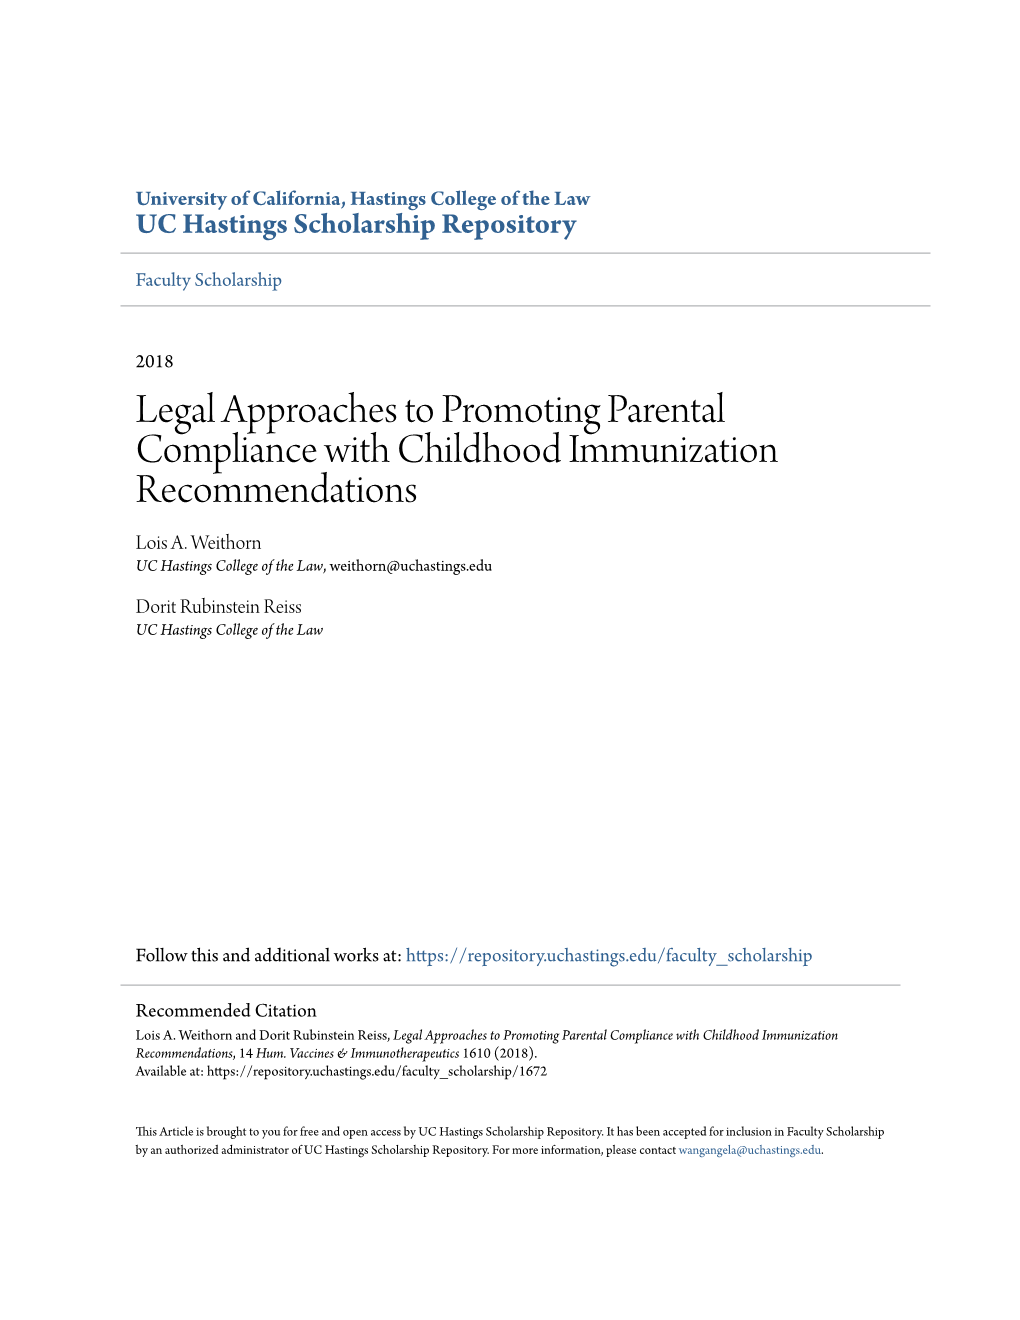 Legal Approaches to Promoting Parental Compliance with Childhood Immunization Recommendations Lois A